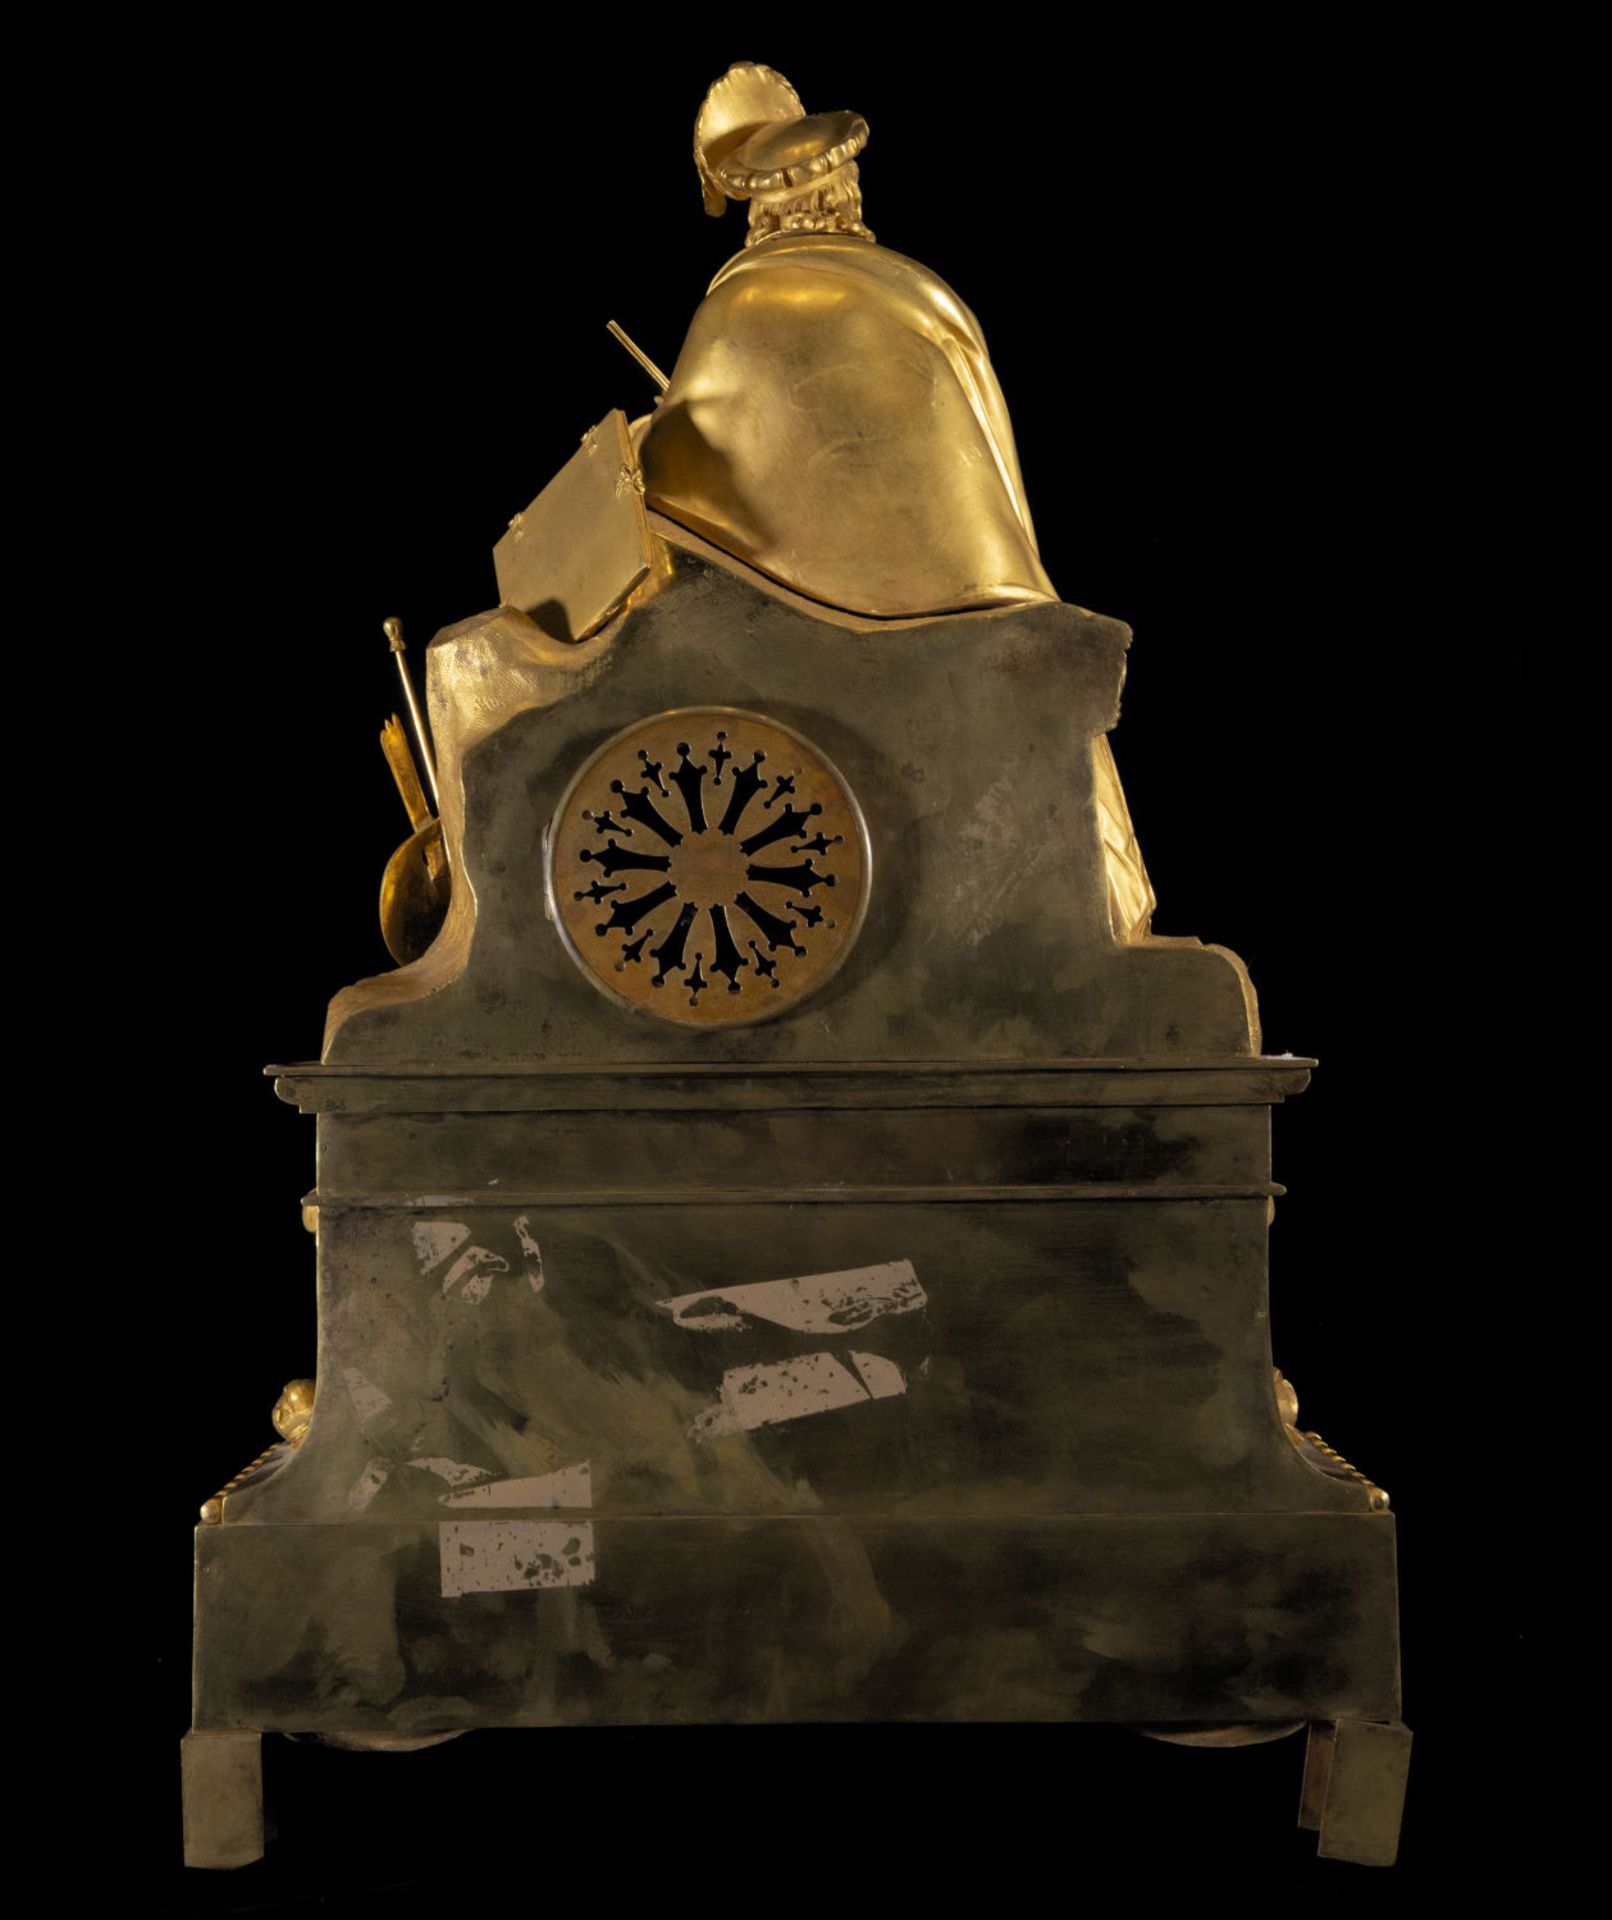 Large Empire table clock with the motif of Michelangelo Buonarroti, 19th century French school - Image 8 of 8